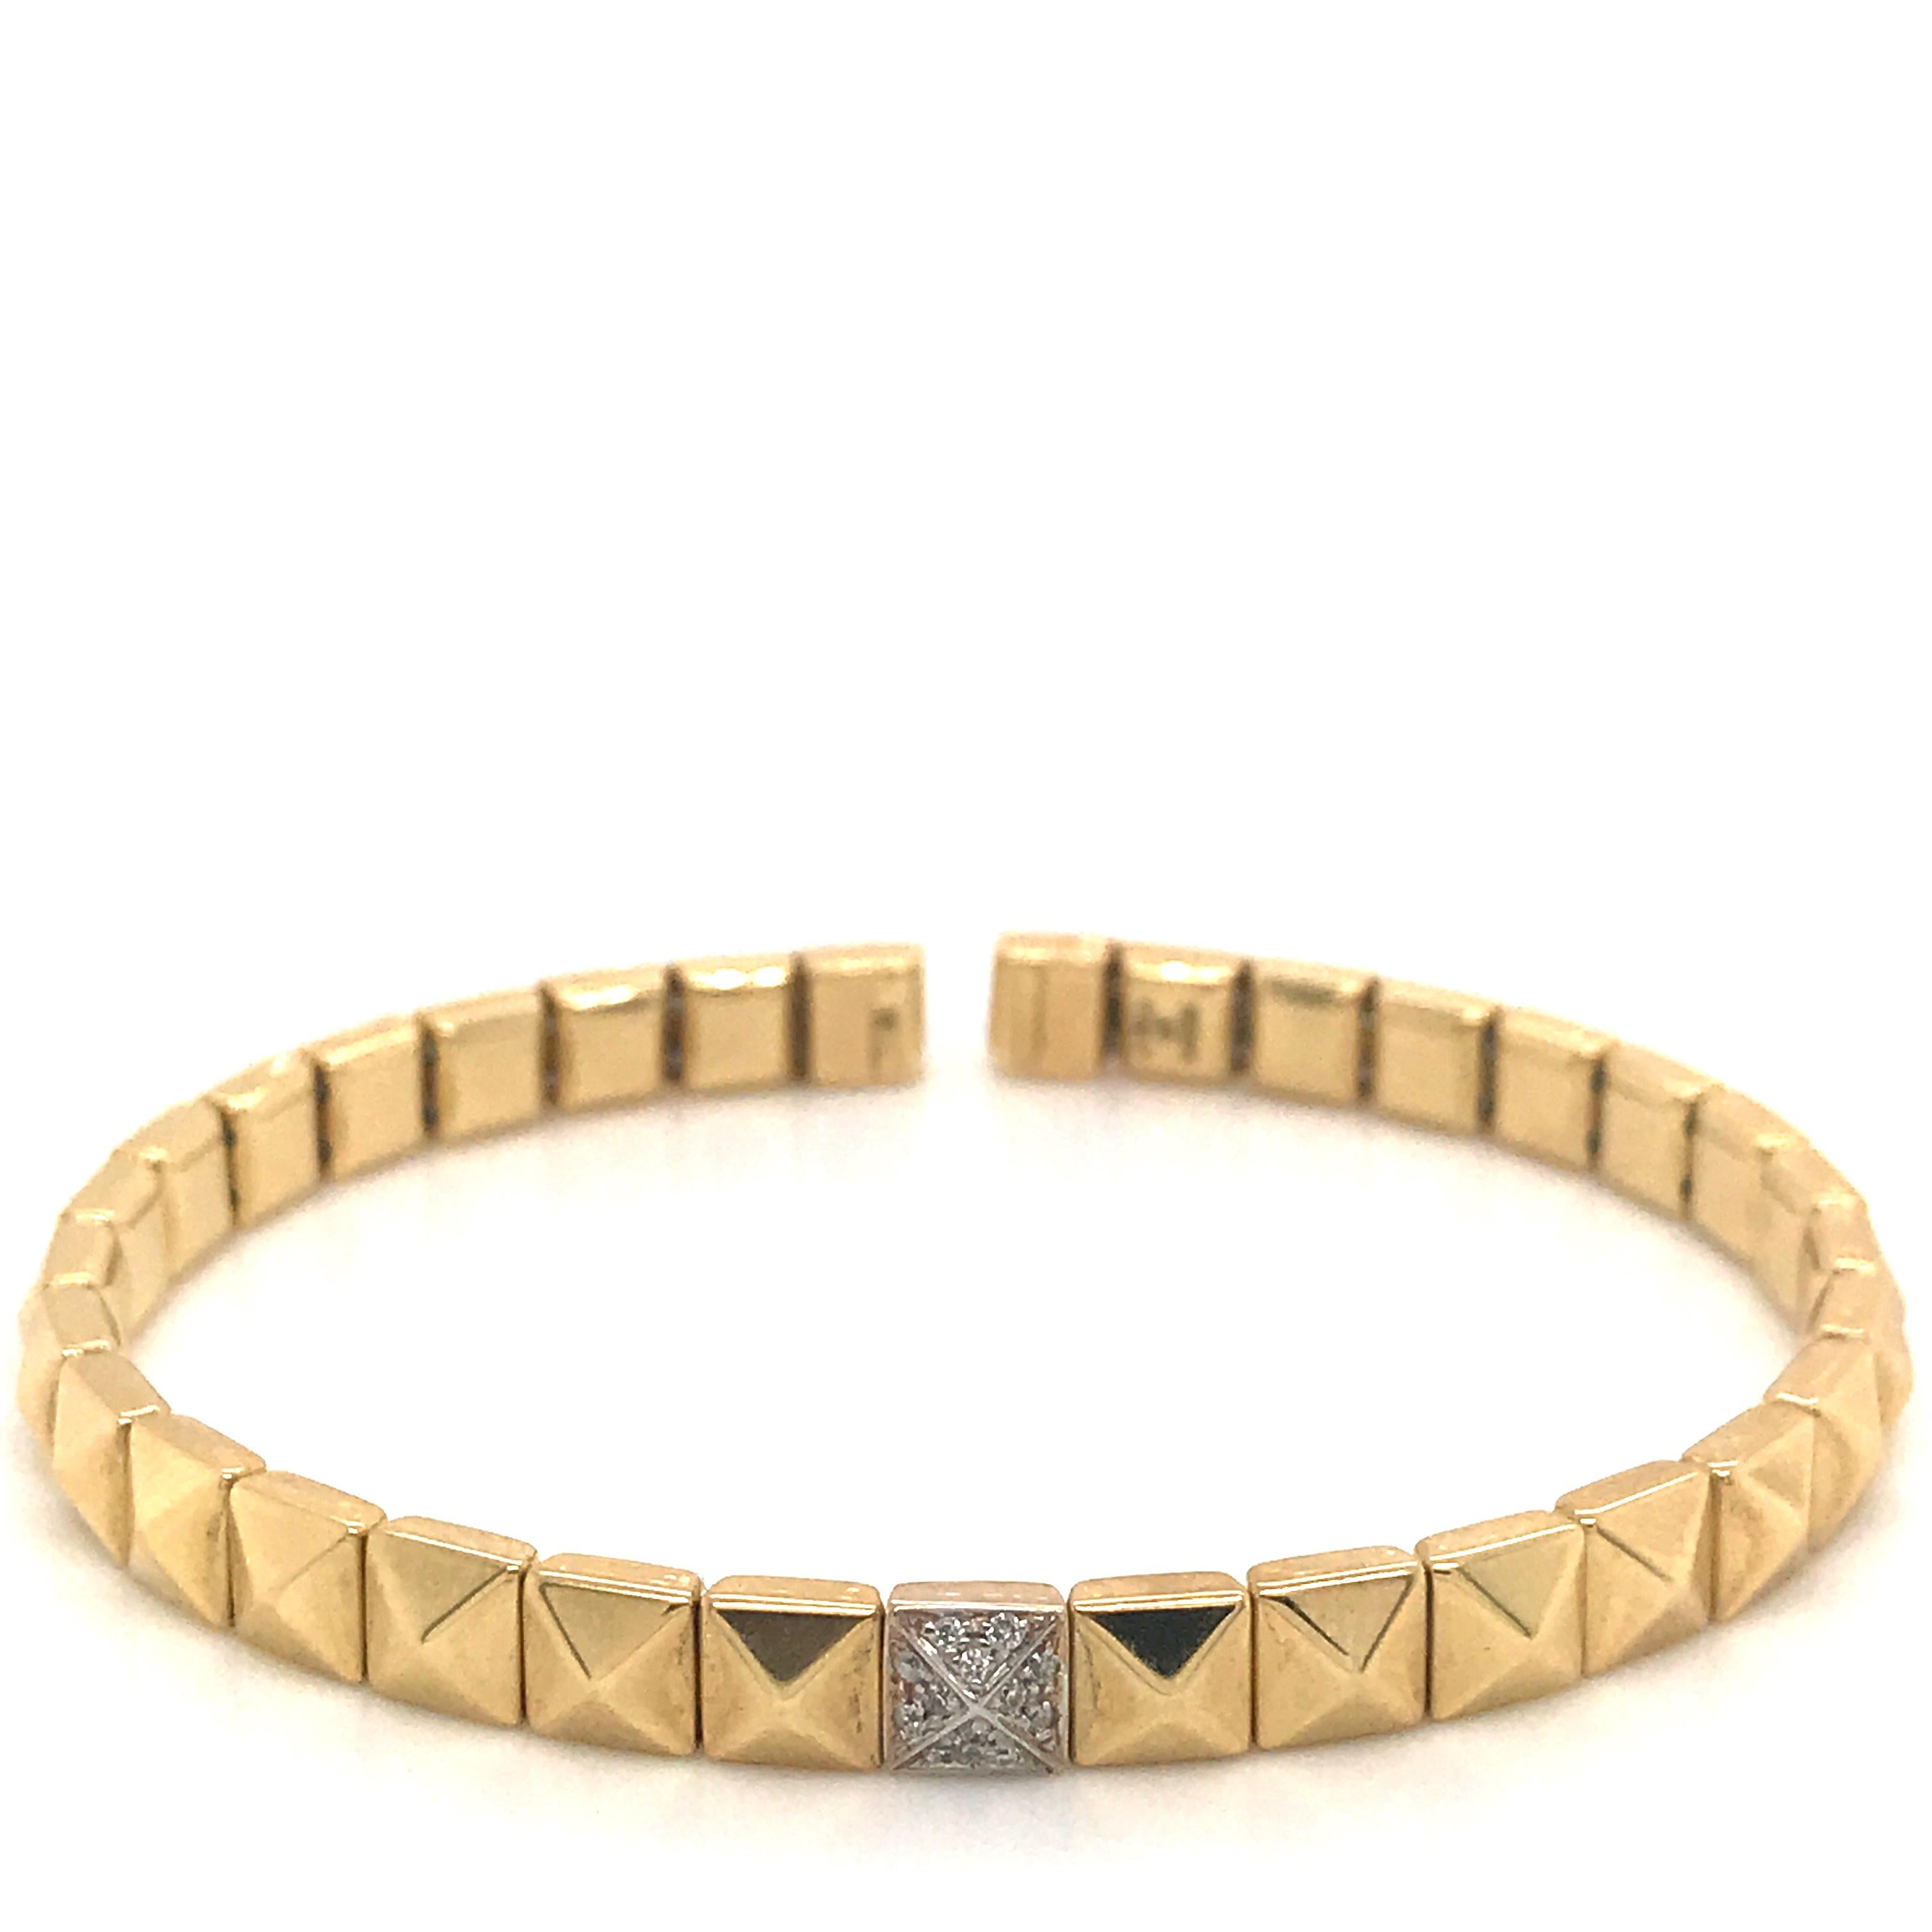 Yellow Gold Flexible Bracelet 18 K pyramid shape.
Weight Gold 10.20
Diamond 0.60 ct Color G
Worn alone or overlapped for a personal mix & match game, Stretch Spring jewels define a minimalist and decisively, featuring refined details to complete an